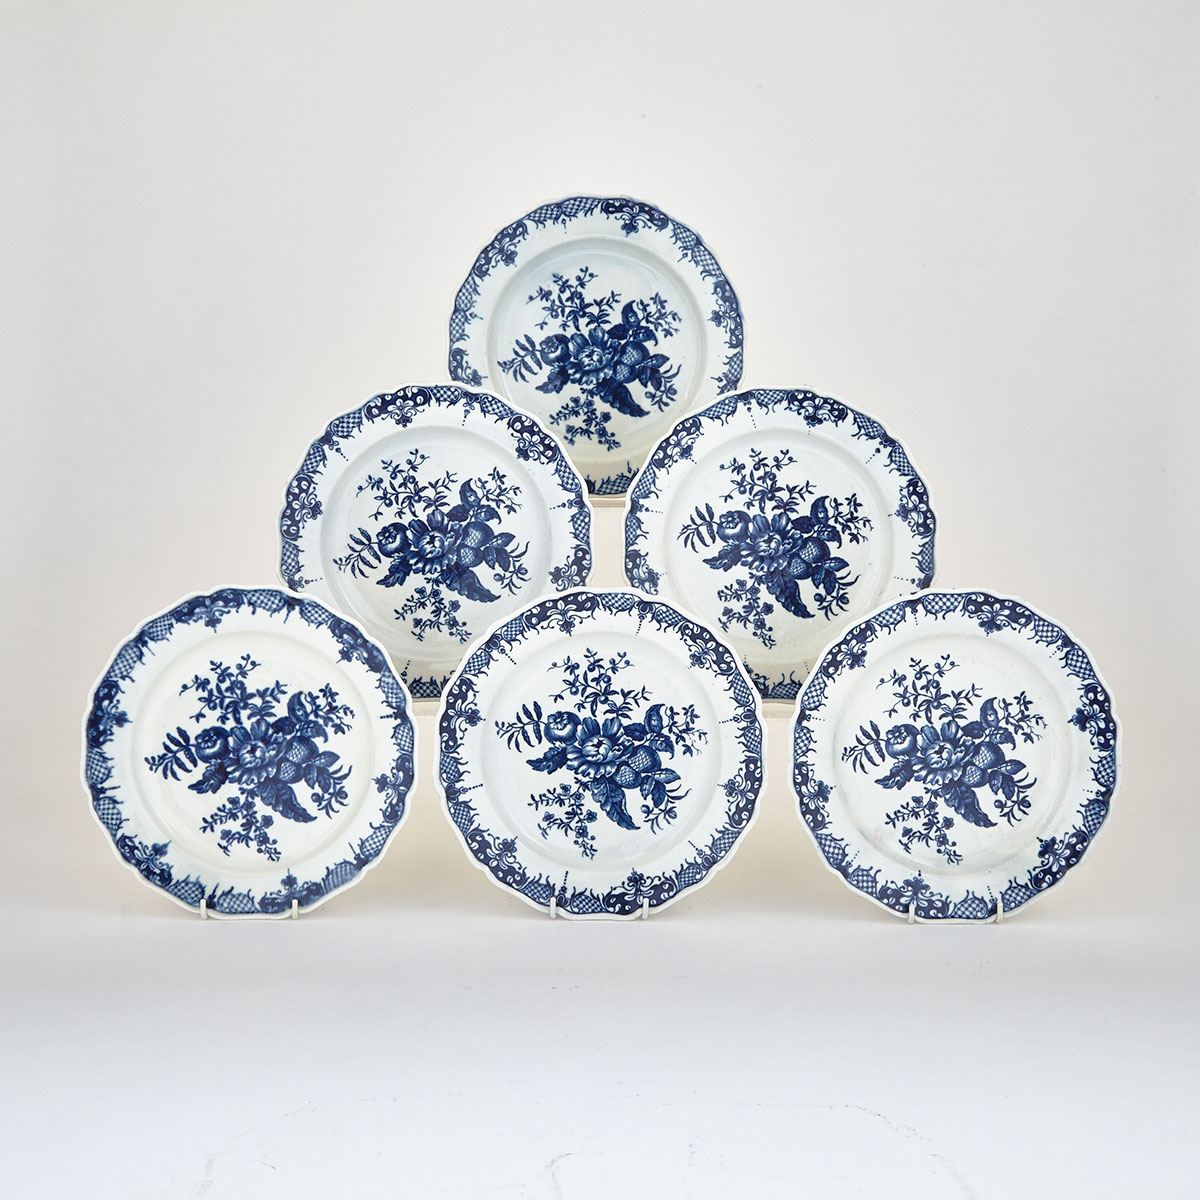 Six Worcester ‘Pine Cone’ Pattern Plates, c.1770-85